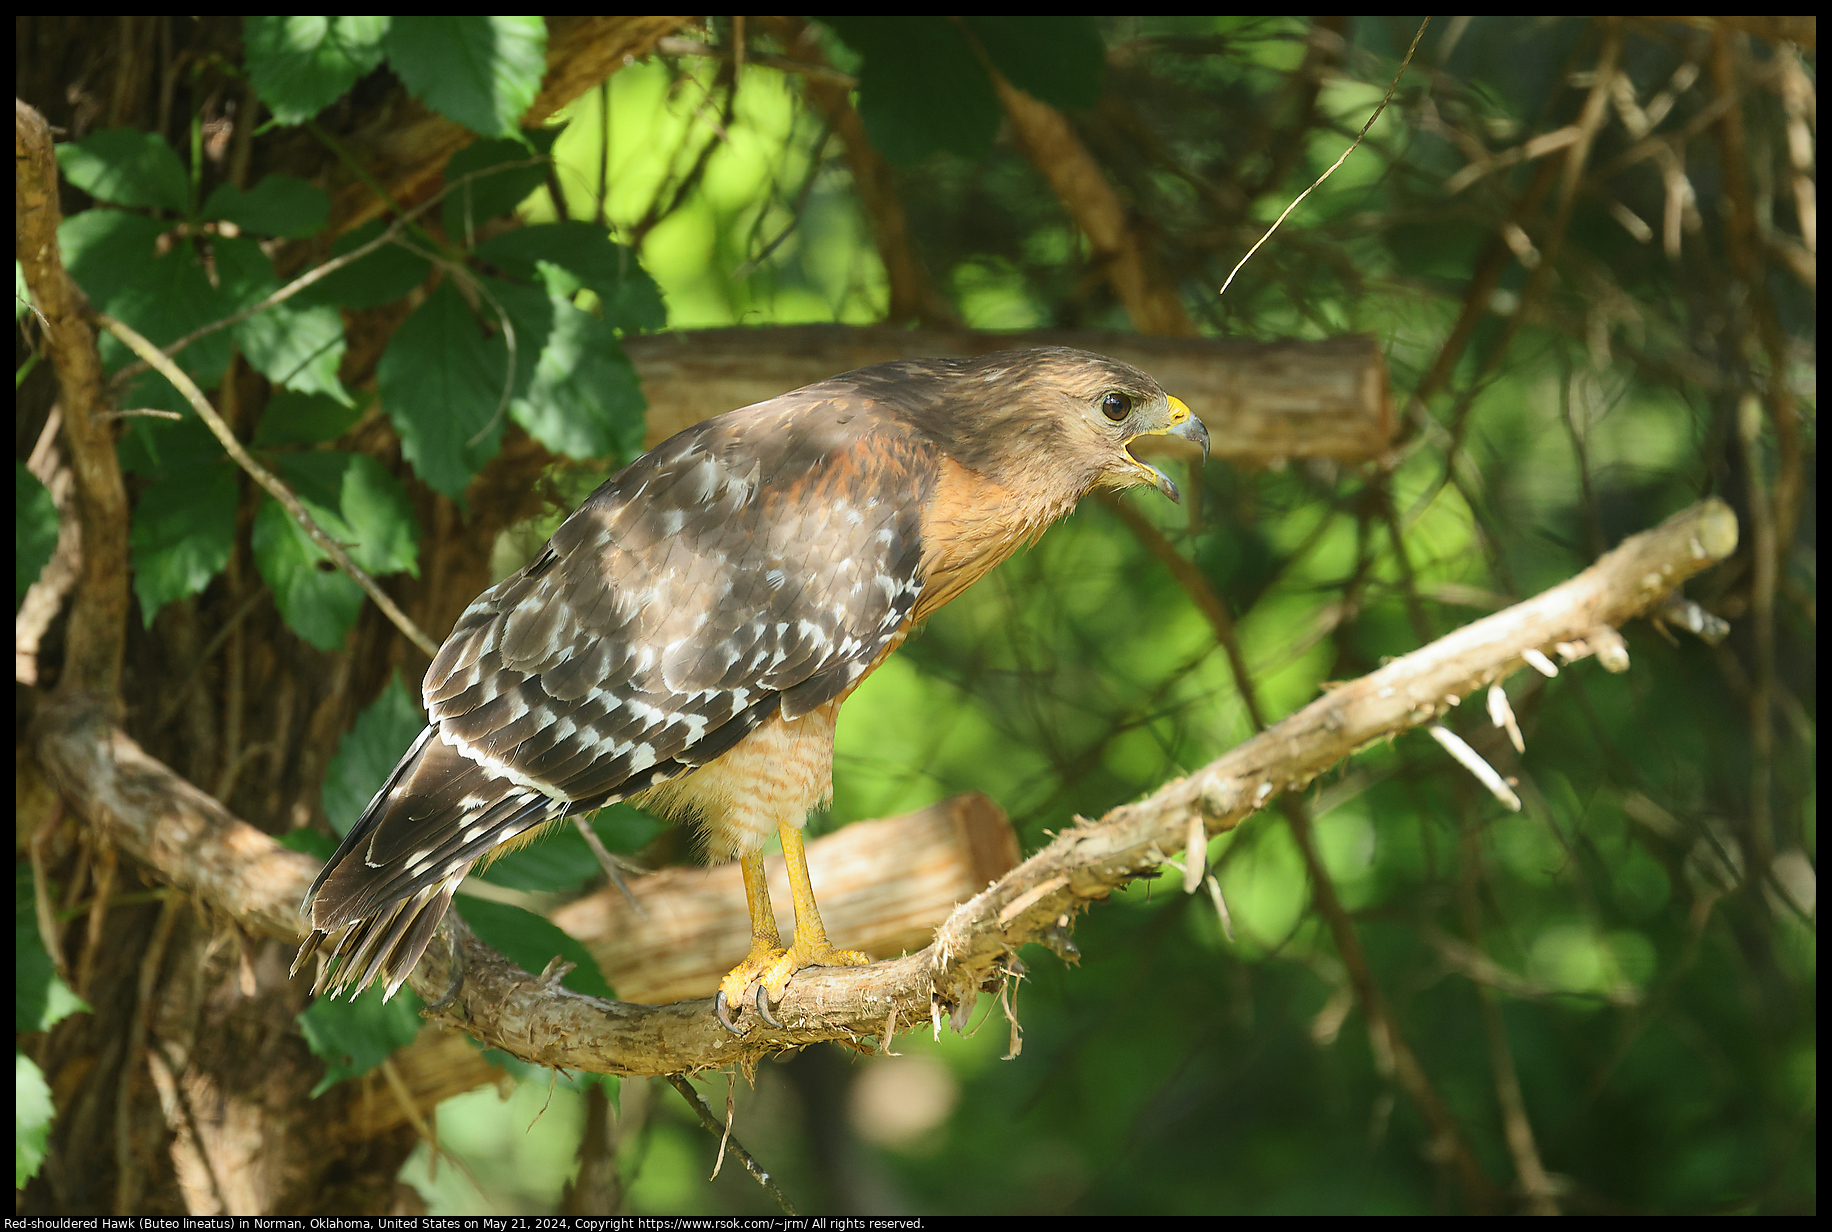 Red-shouldered Hawk (Buteo lineatus) in Norman, Oklahoma, United States on May 21, 2024